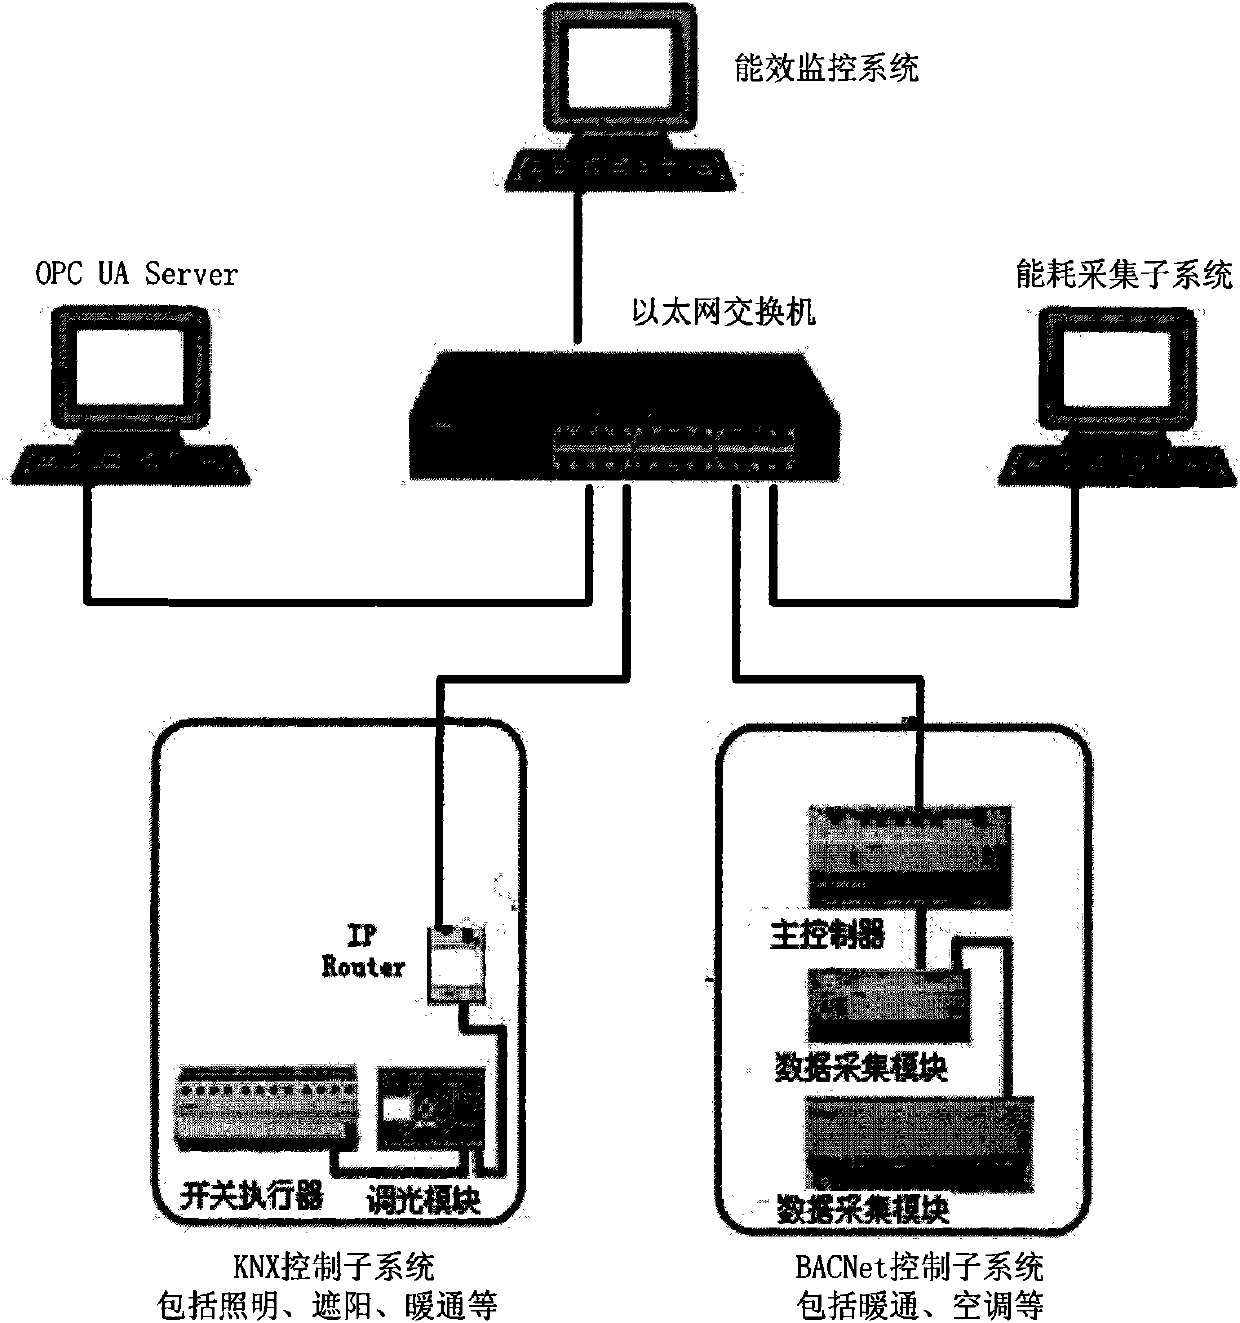 Public building energy efficiency data collecting and processing system based on OPC UA